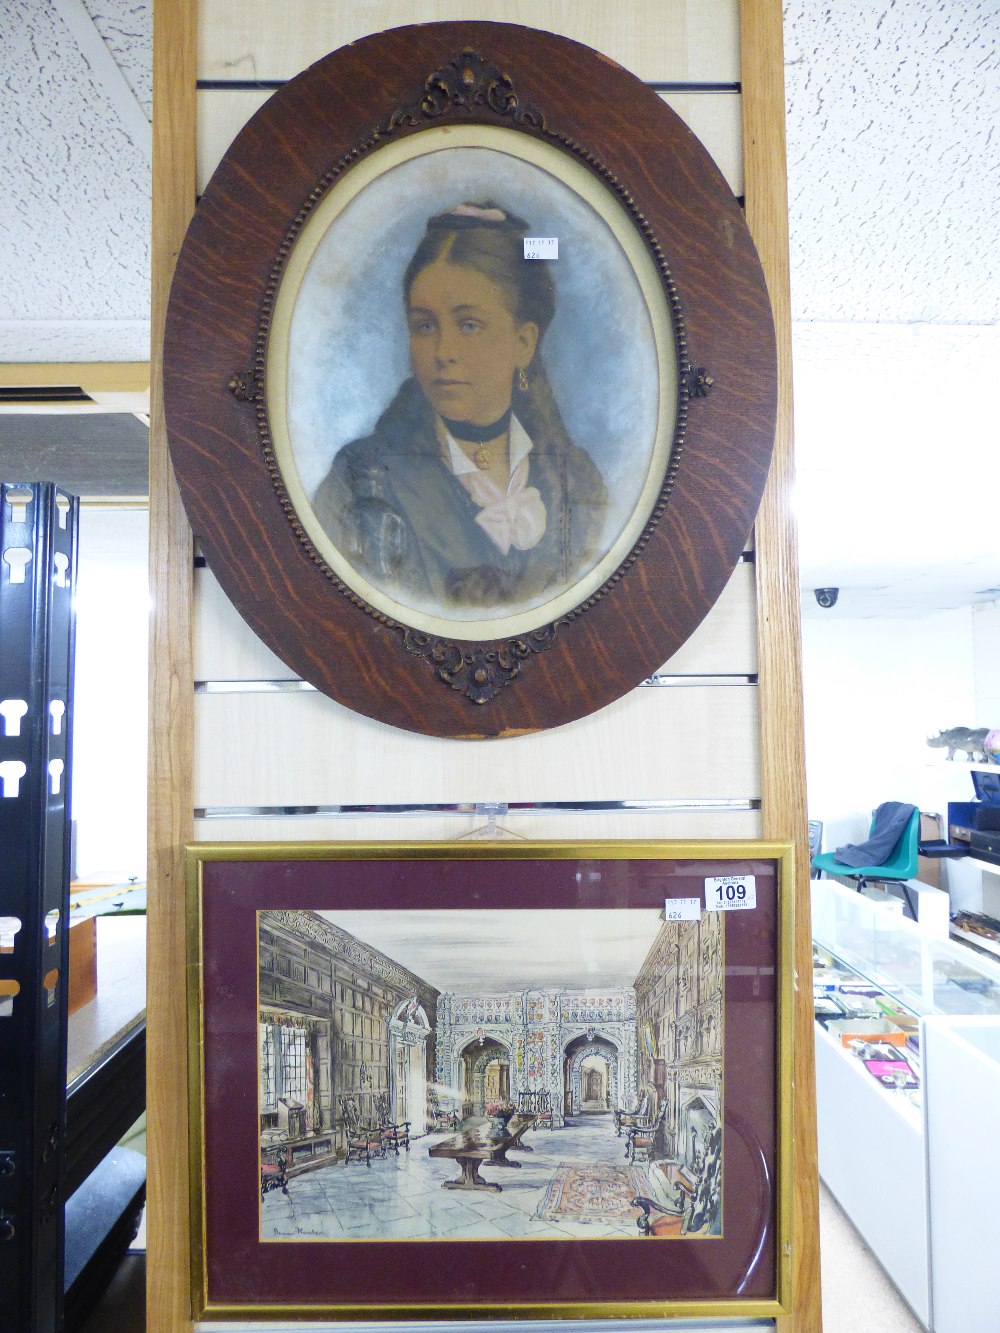 PICTURE OF A LADY IN AN OVAL OAK FRAME + PRINT OF AN EDWARDIAN ROOM